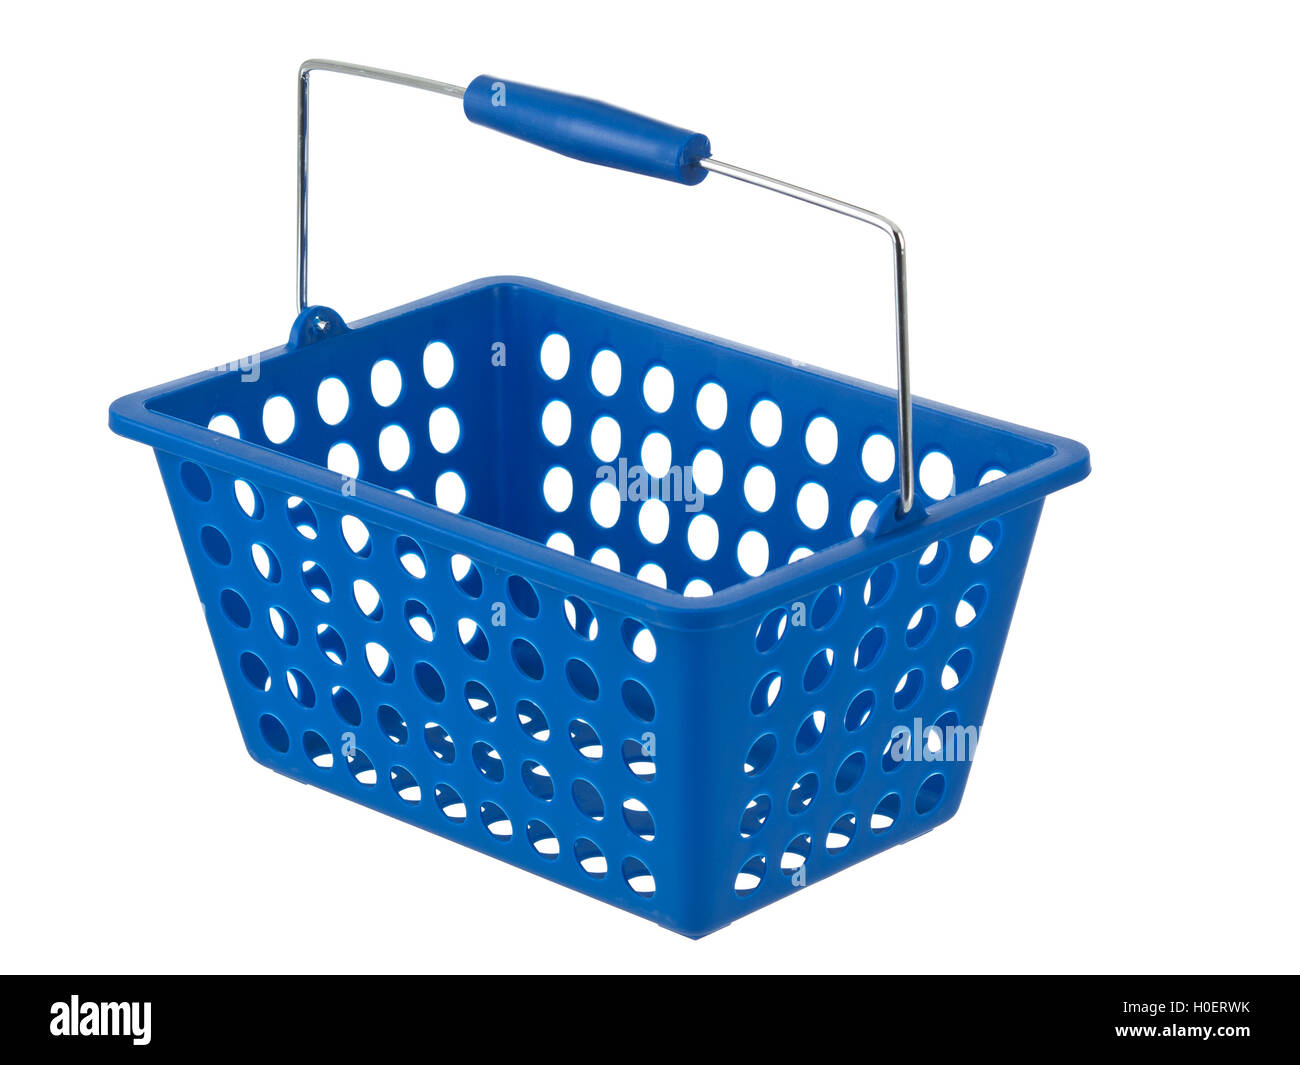 Blue plastic basket side view on pure white background Stock Photo